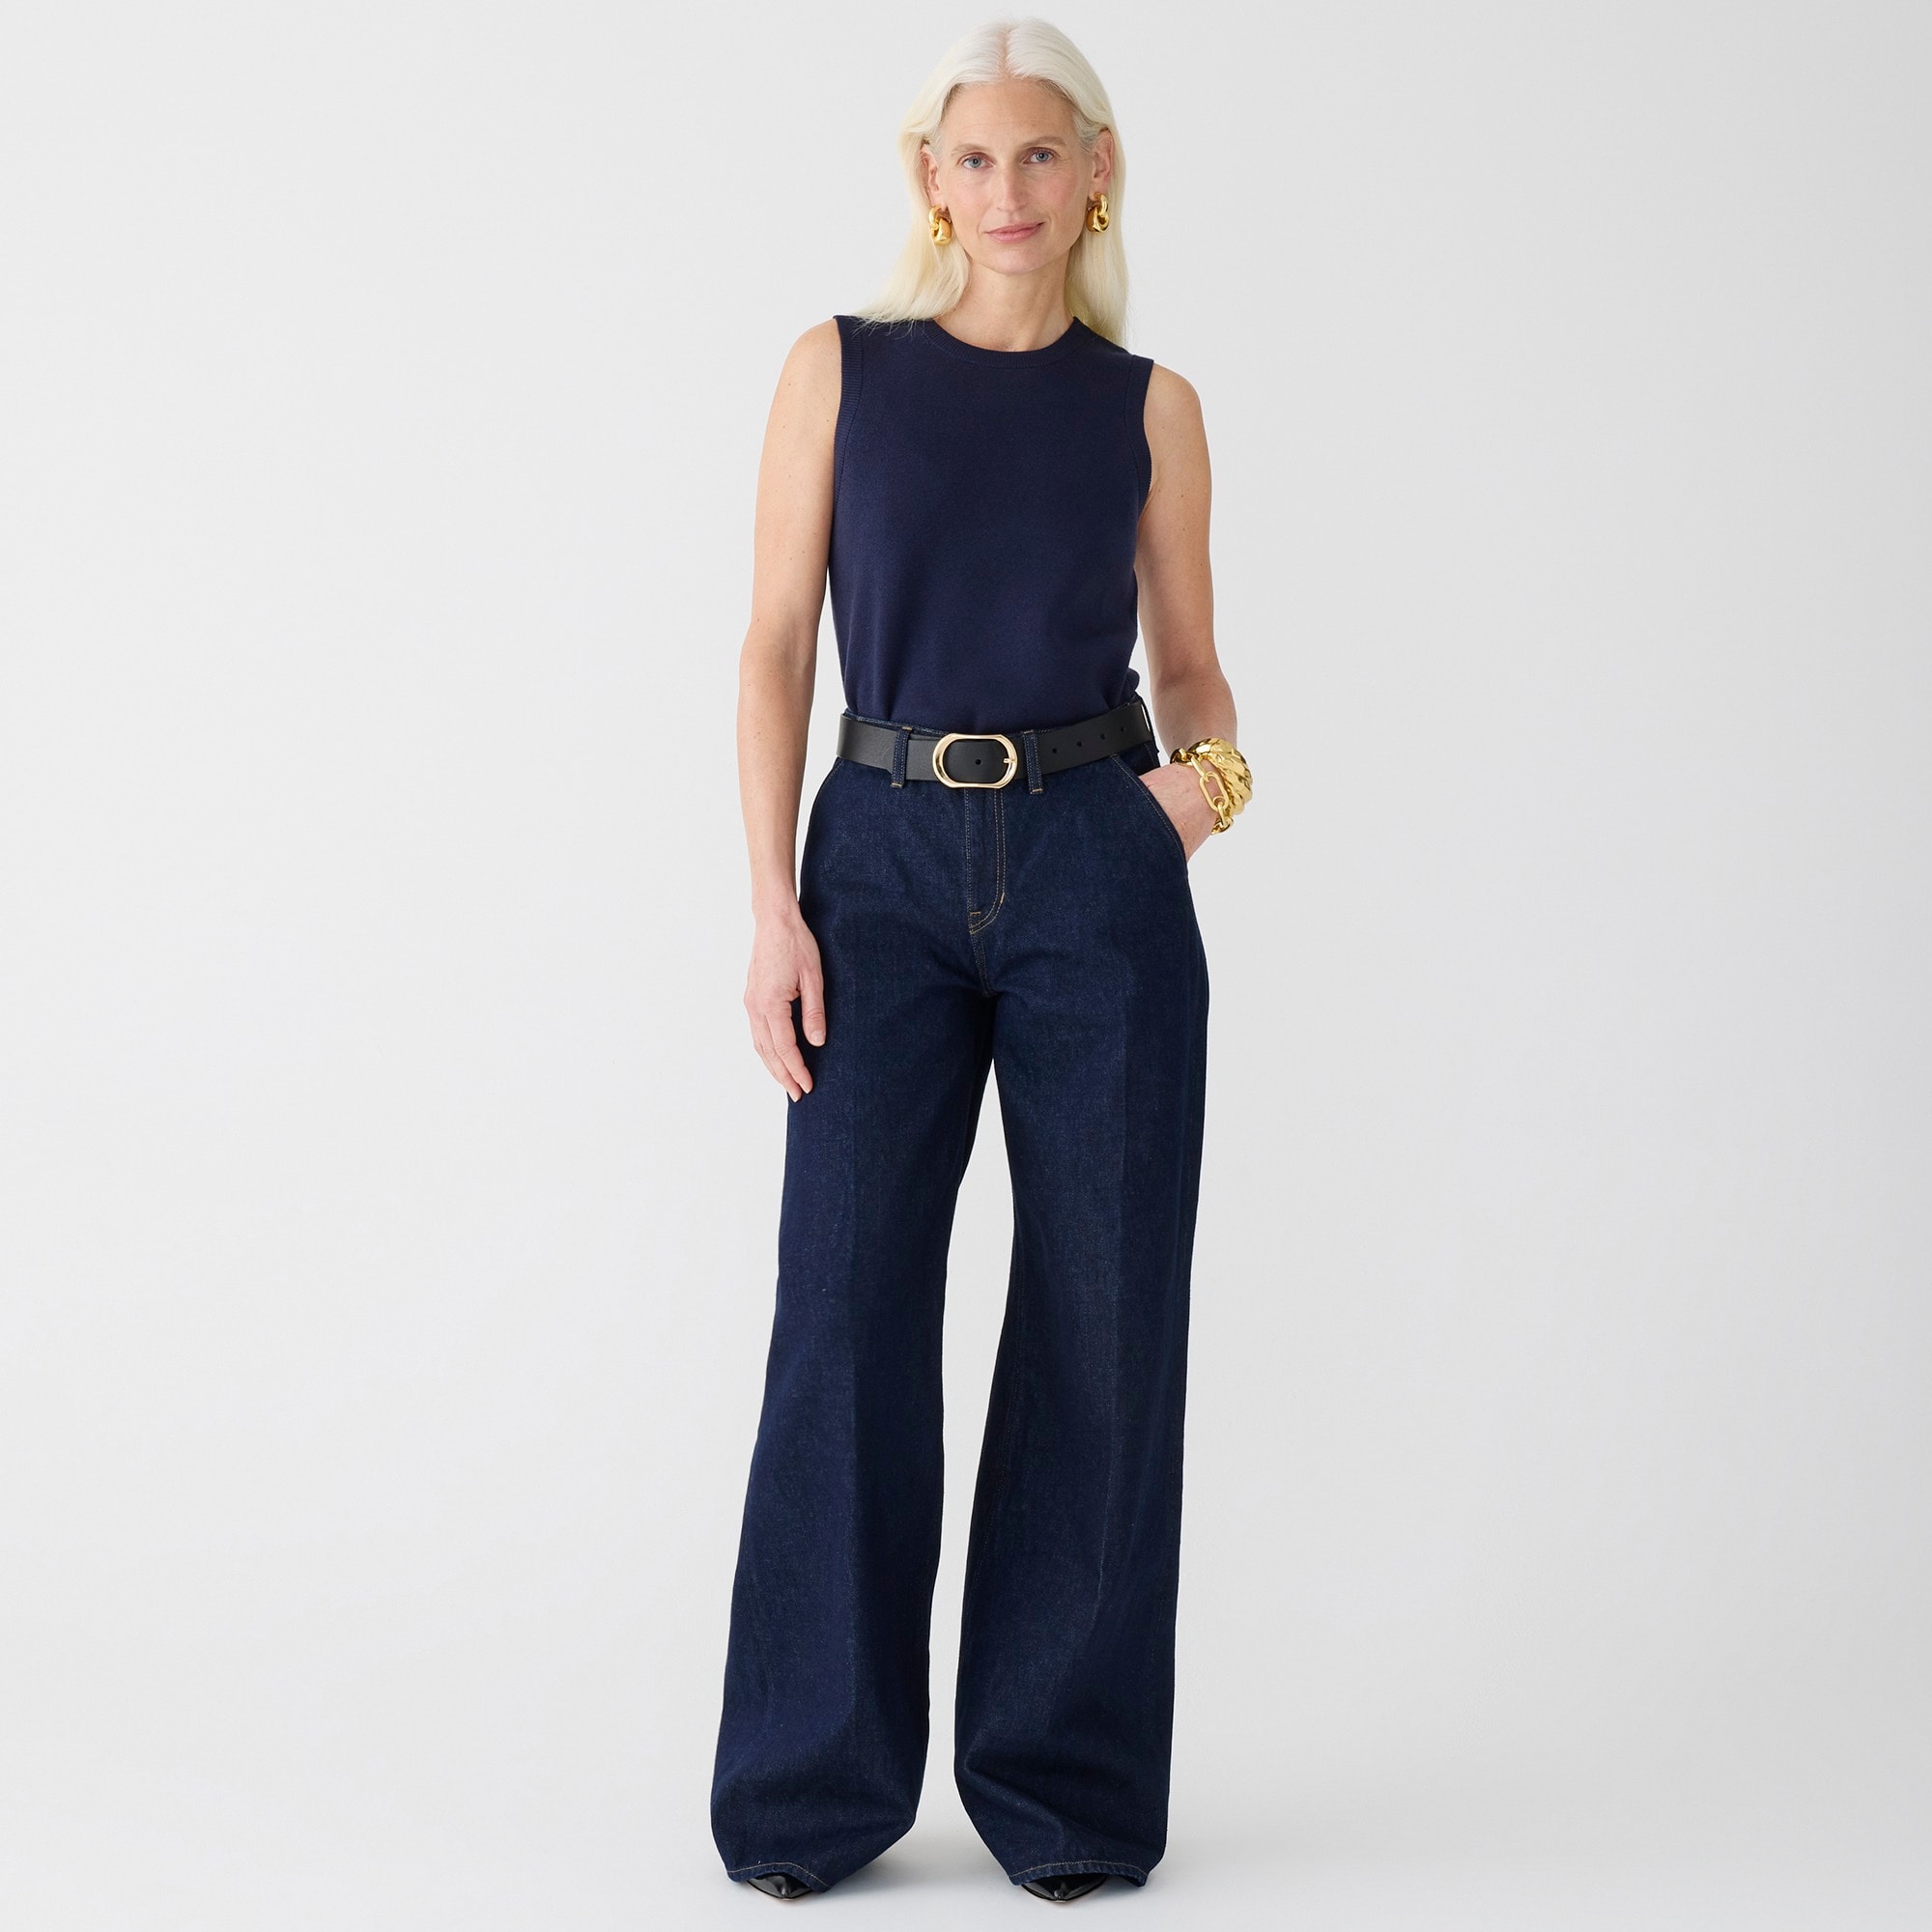  Point Sur puddle jean in Rinse wash